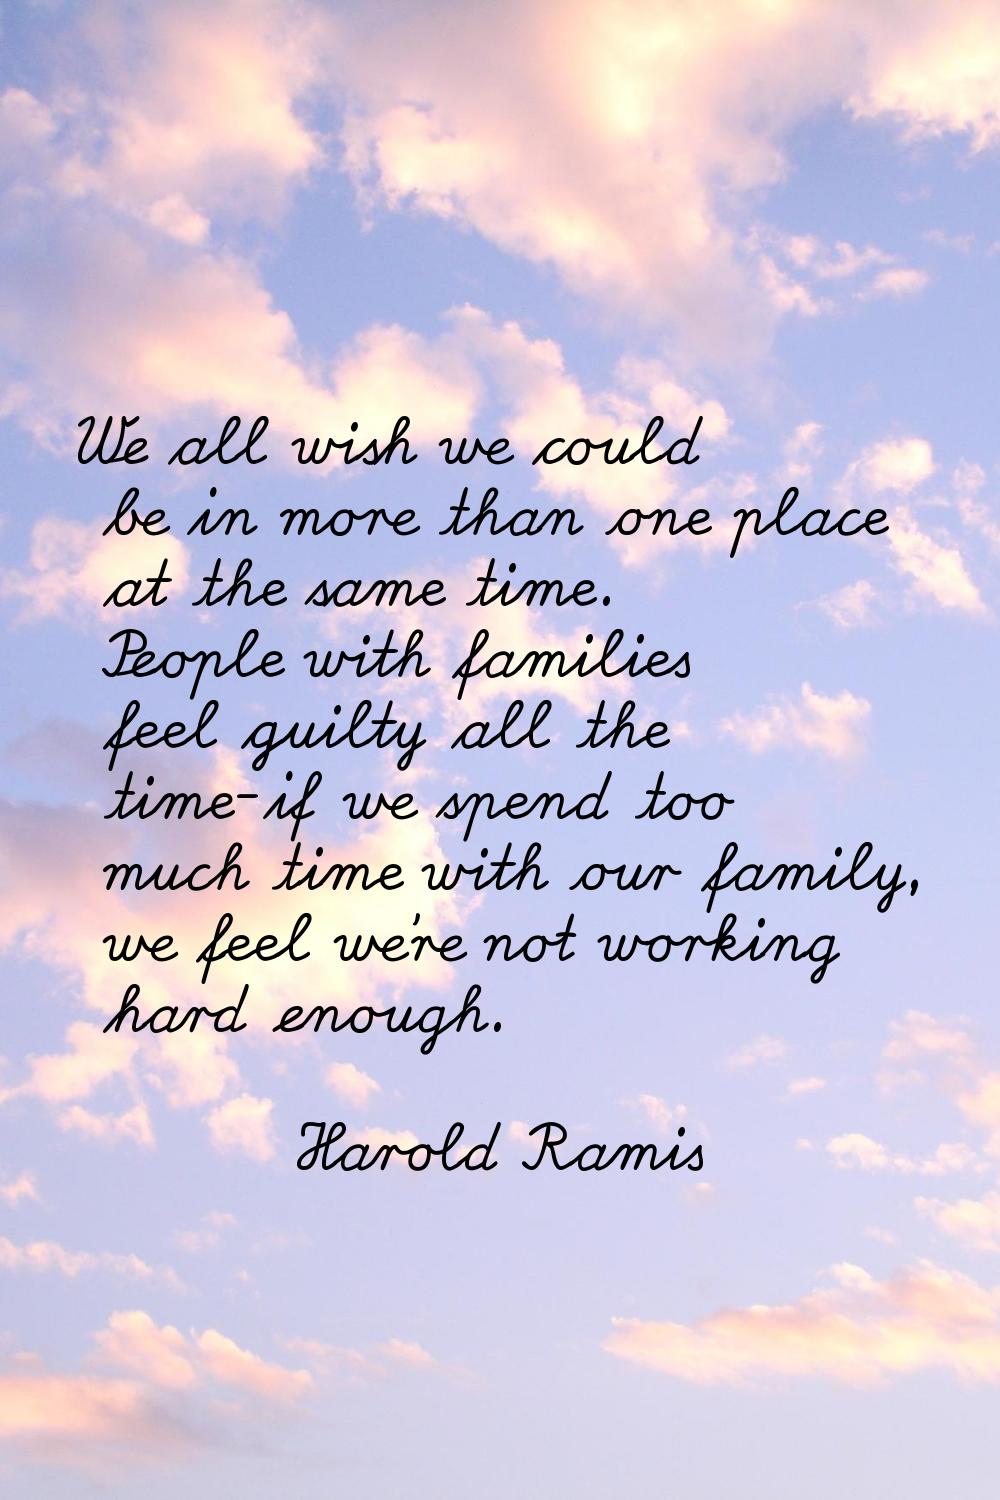 We all wish we could be in more than one place at the same time. People with families feel guilty a